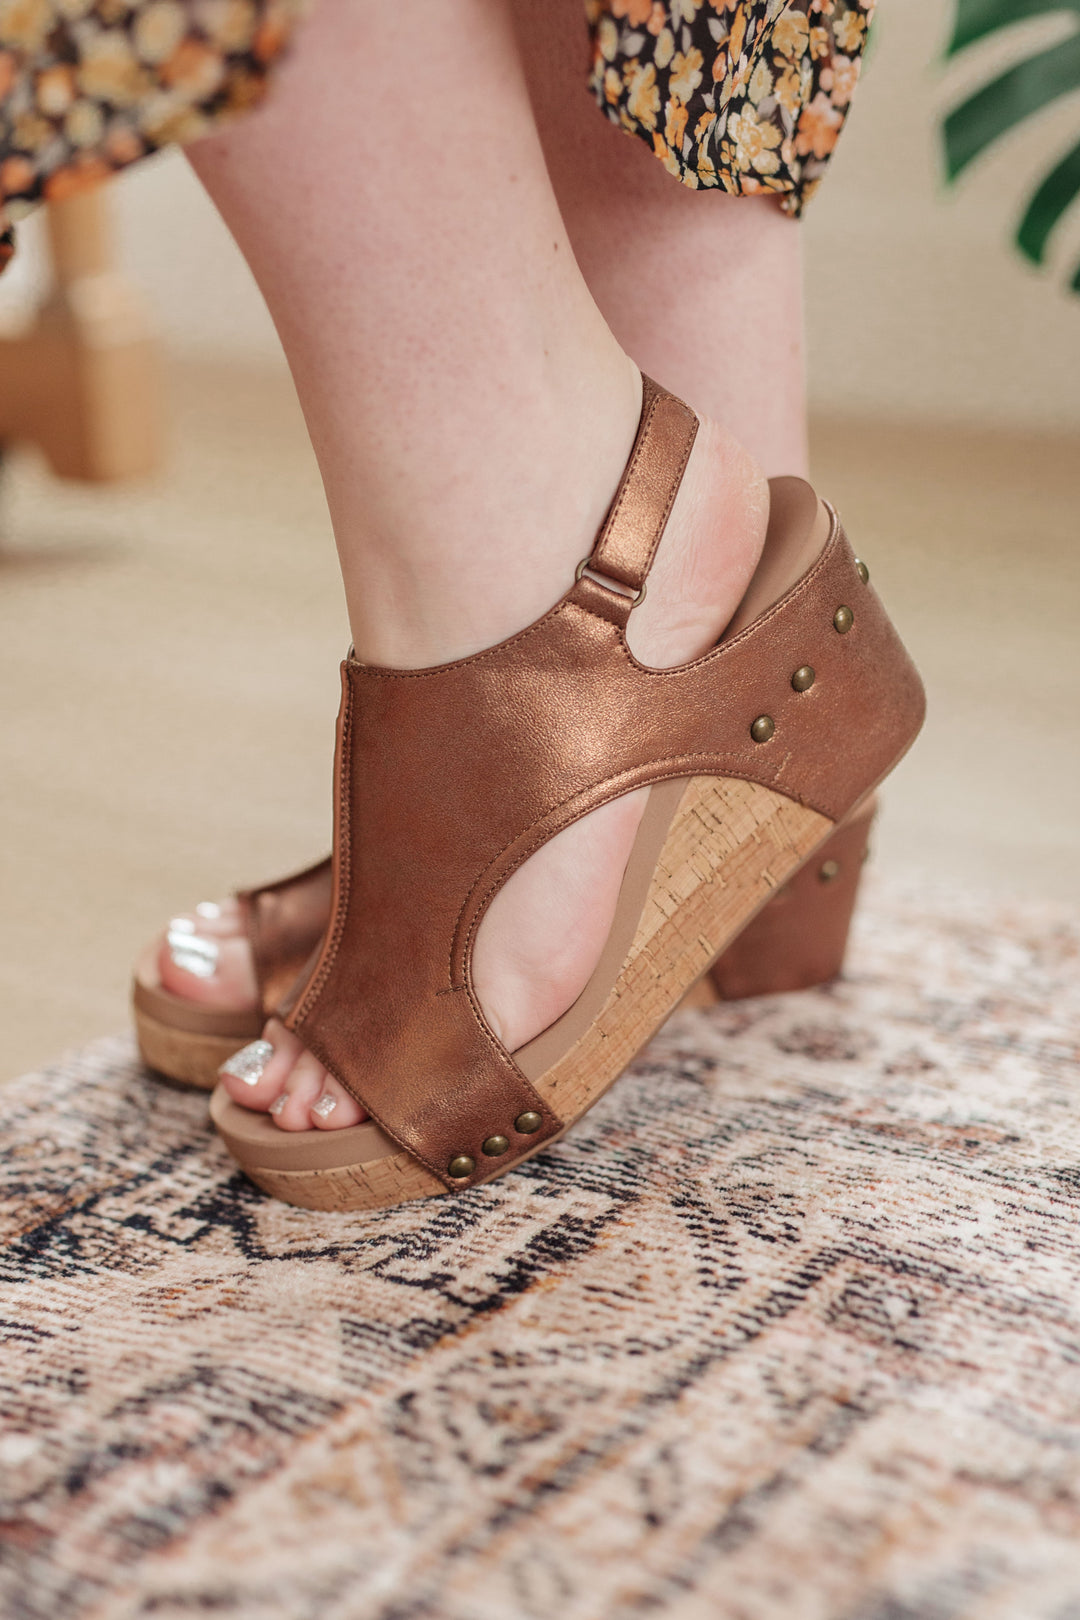 Walk This Way Wedge Sandals in Antique Bronze-Shoes-Inspired by Justeen-Women's Clothing Boutique in Chicago, Illinois